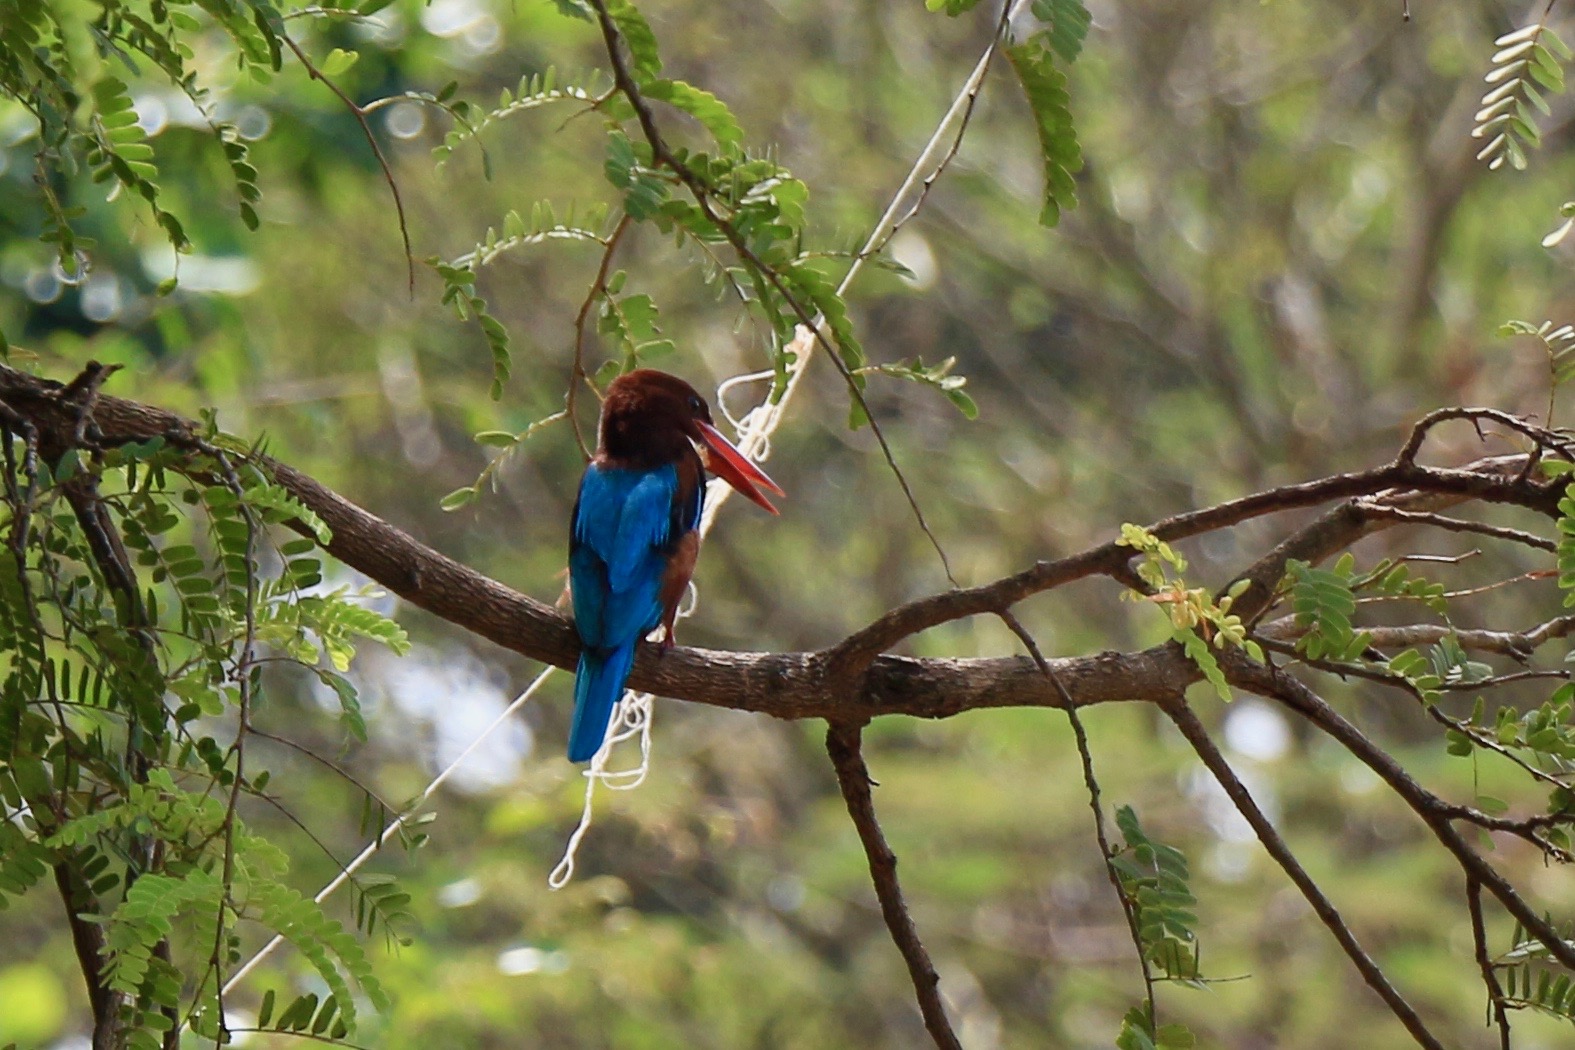 The back of a white-throated kingfisher perched on a branch and with its head angled slightly to the right. From this angle, the white throat is not in view. It has a brown head, blue back feathers and tail, and a comically large red bill like all kingfishers.
